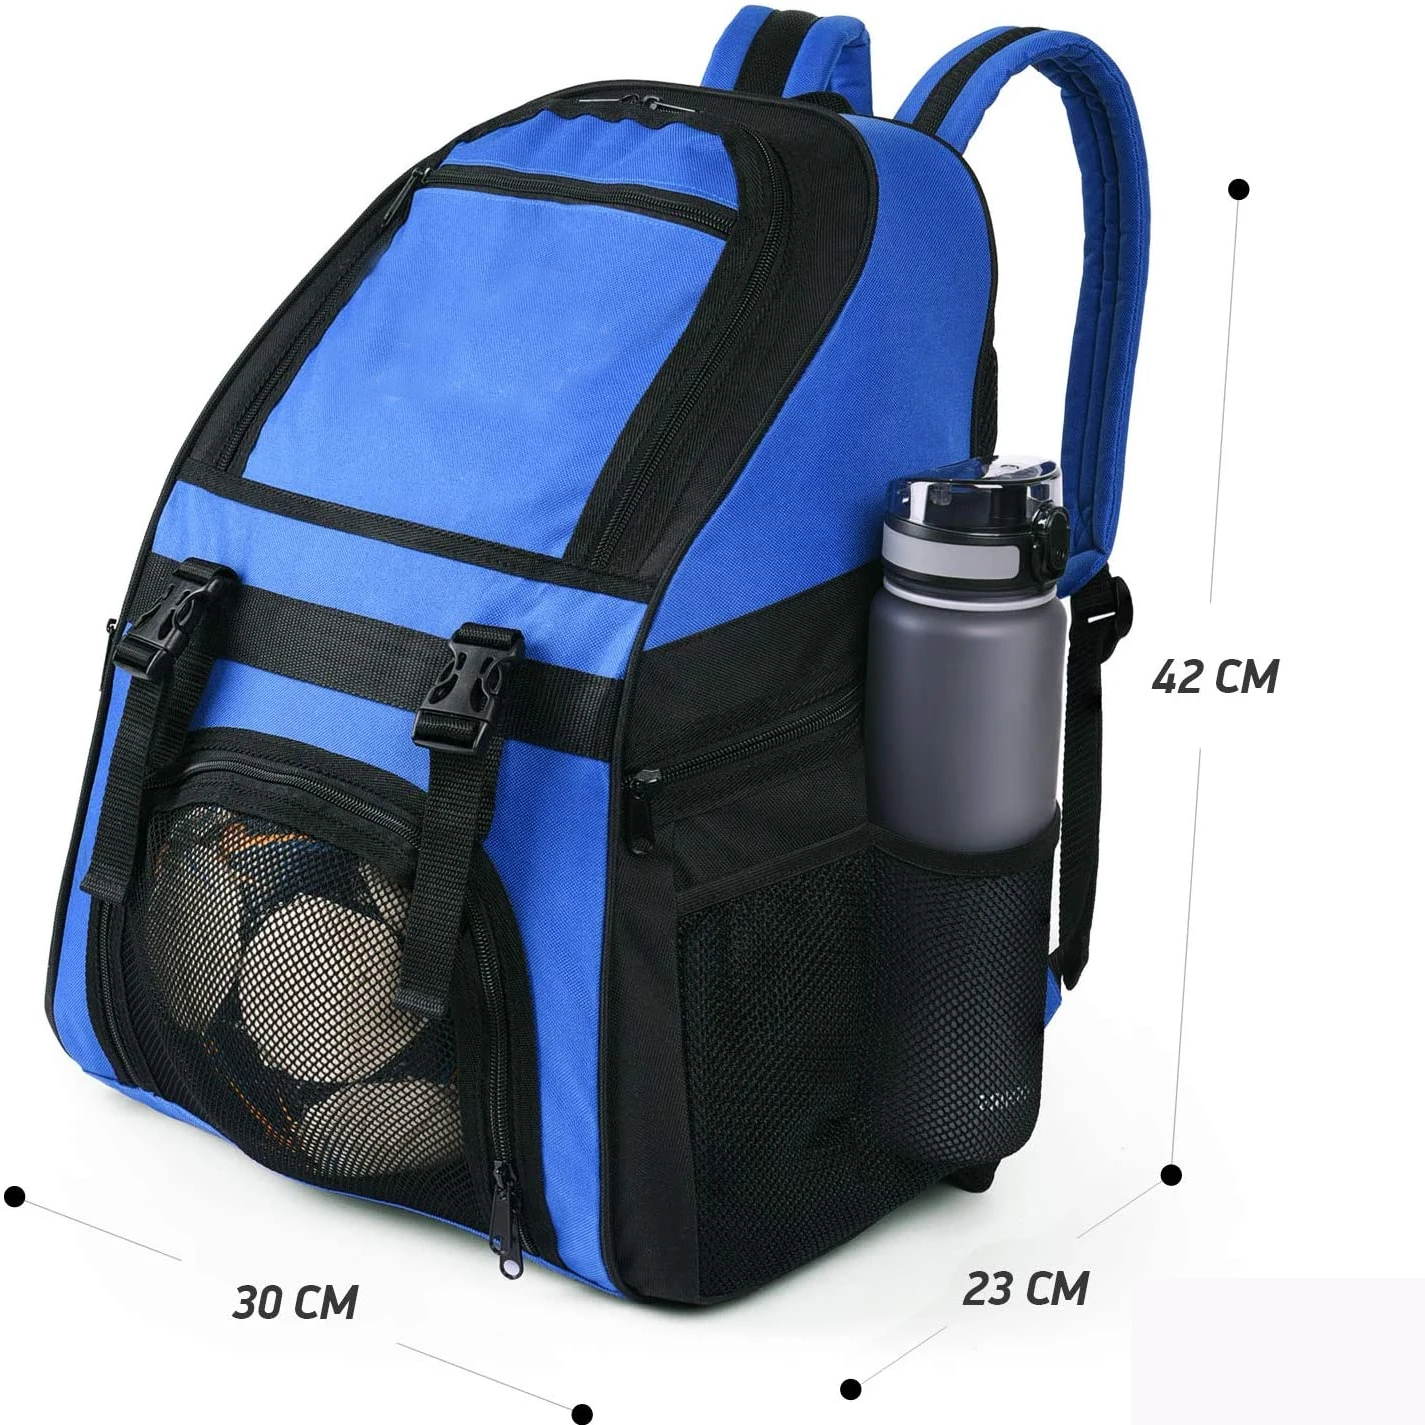 Soccer Backpack With Ball Holder Compartment For Sports Youth Team Bag Basketball Volleyball Gym - Buy Backpack With Cooler Compartment,Custom Basketball Backpacks,Custom Backpacks Product on Alibaba.com